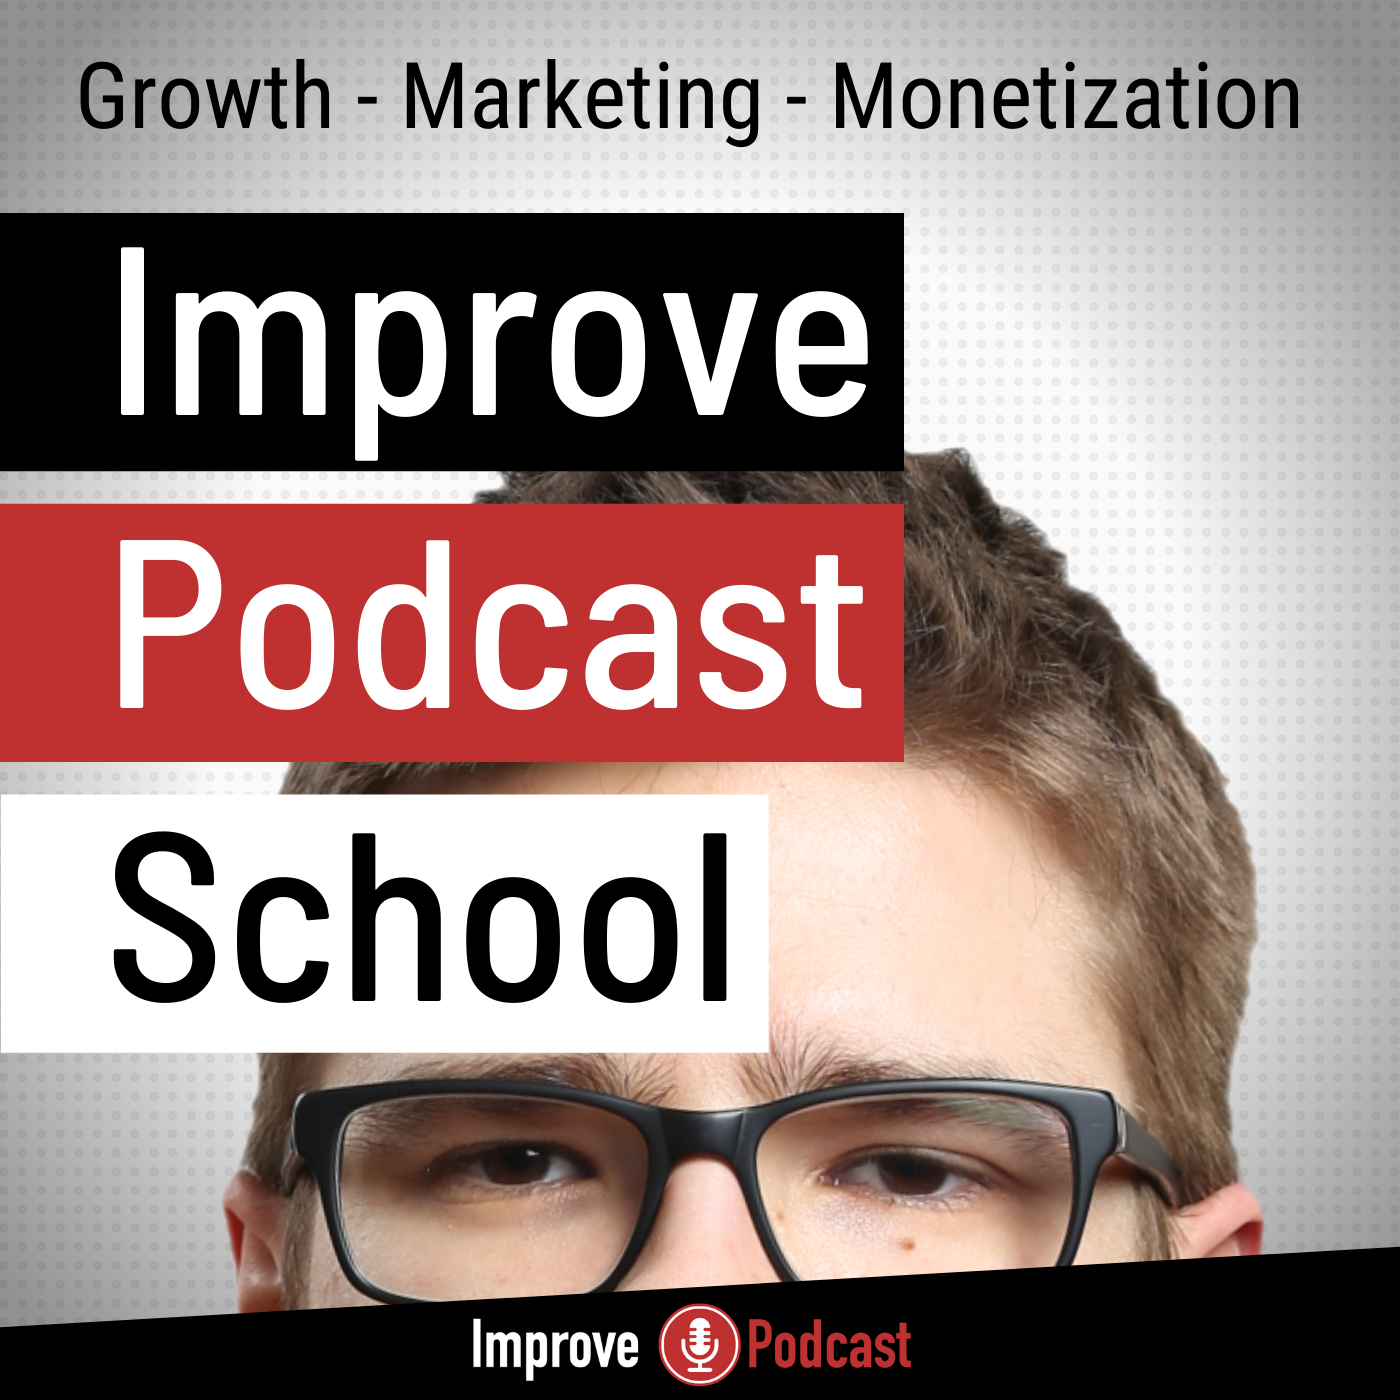 Artwork for podcast Improve Podcast School - Podcasting Growth, Marketing and Monetization Tips